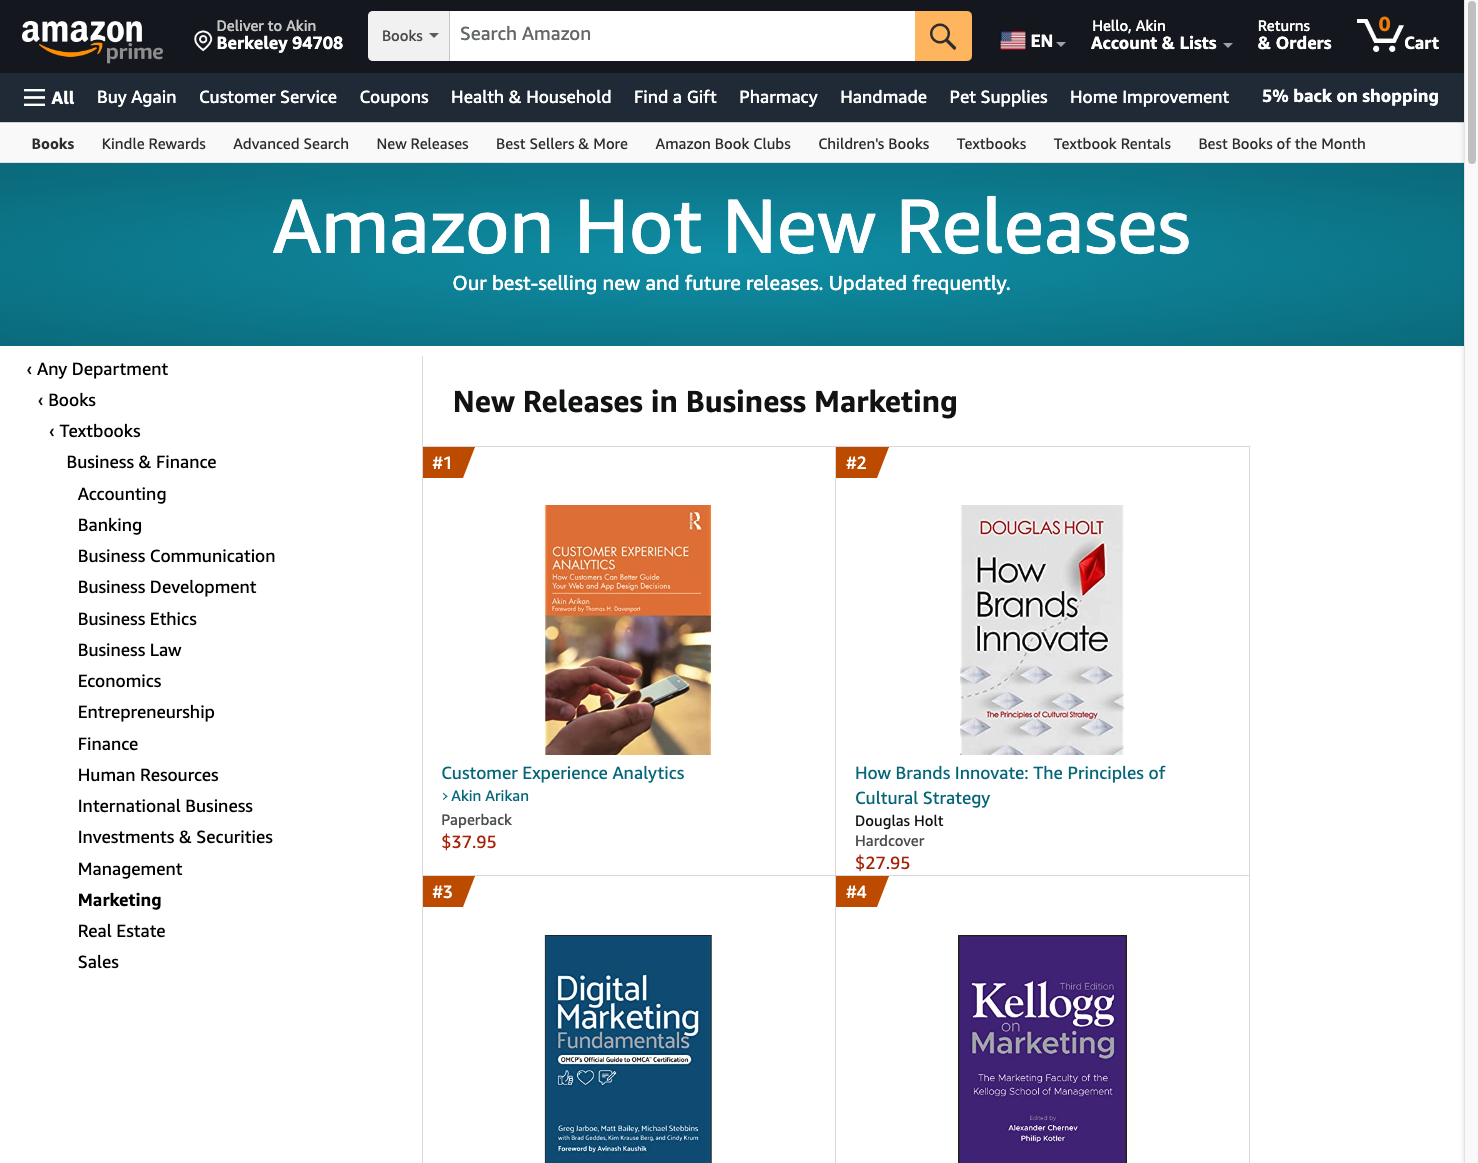 #1 in Amazon’s new releases for Business Marketing: Customer Experience Analytics